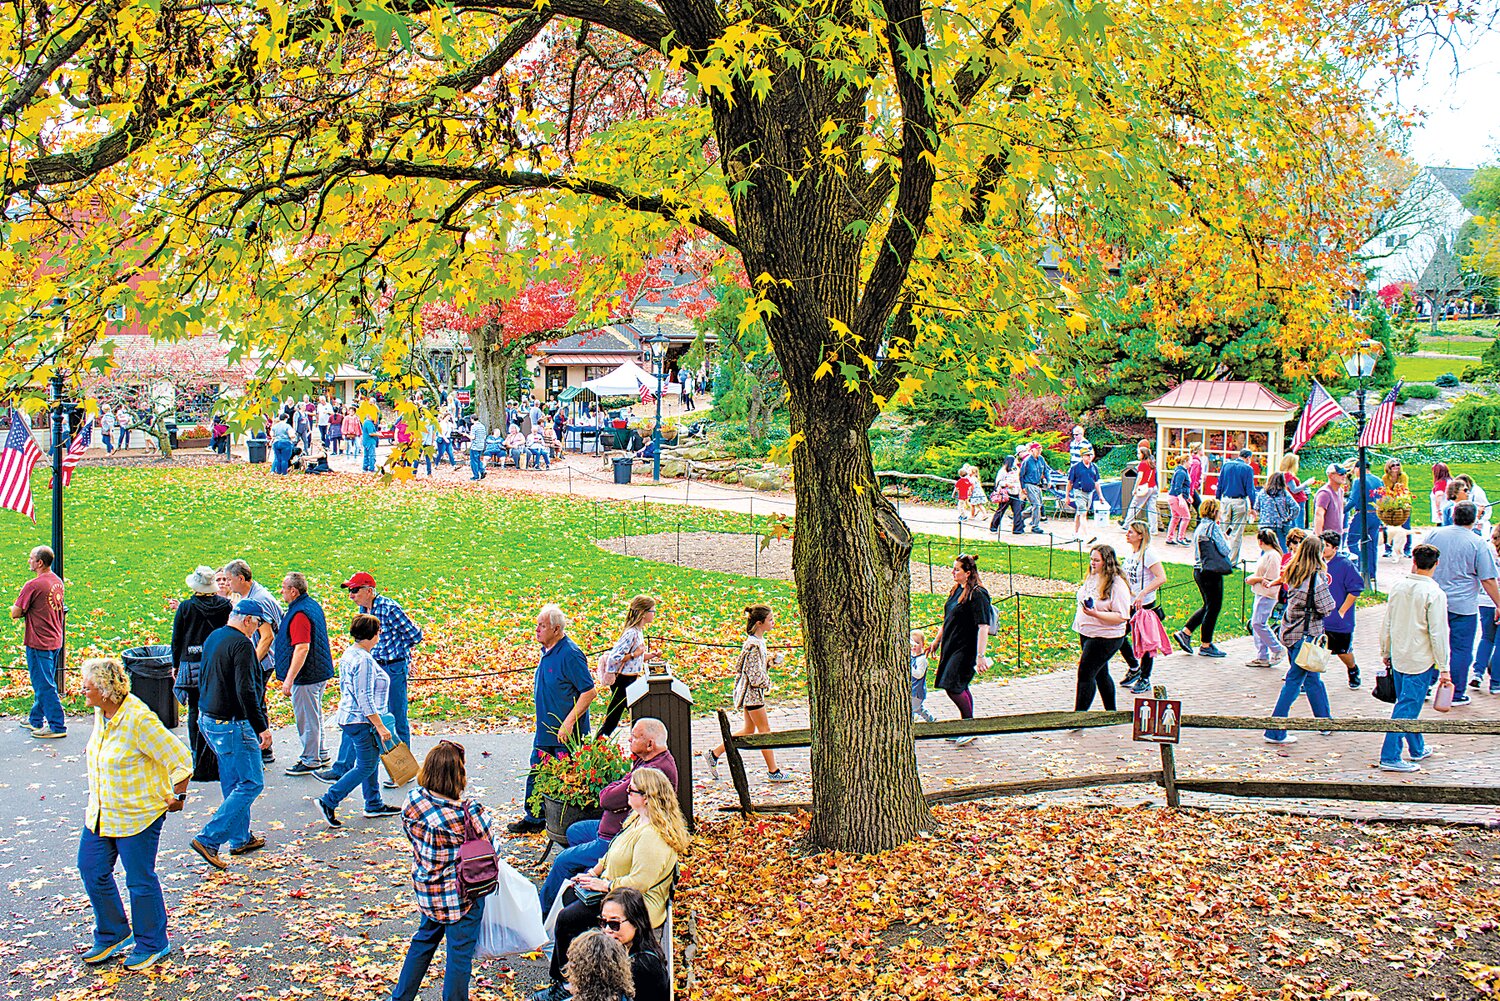 Visitors enjoy a previous Apple Festival and fall colors at Peddler’s Village.